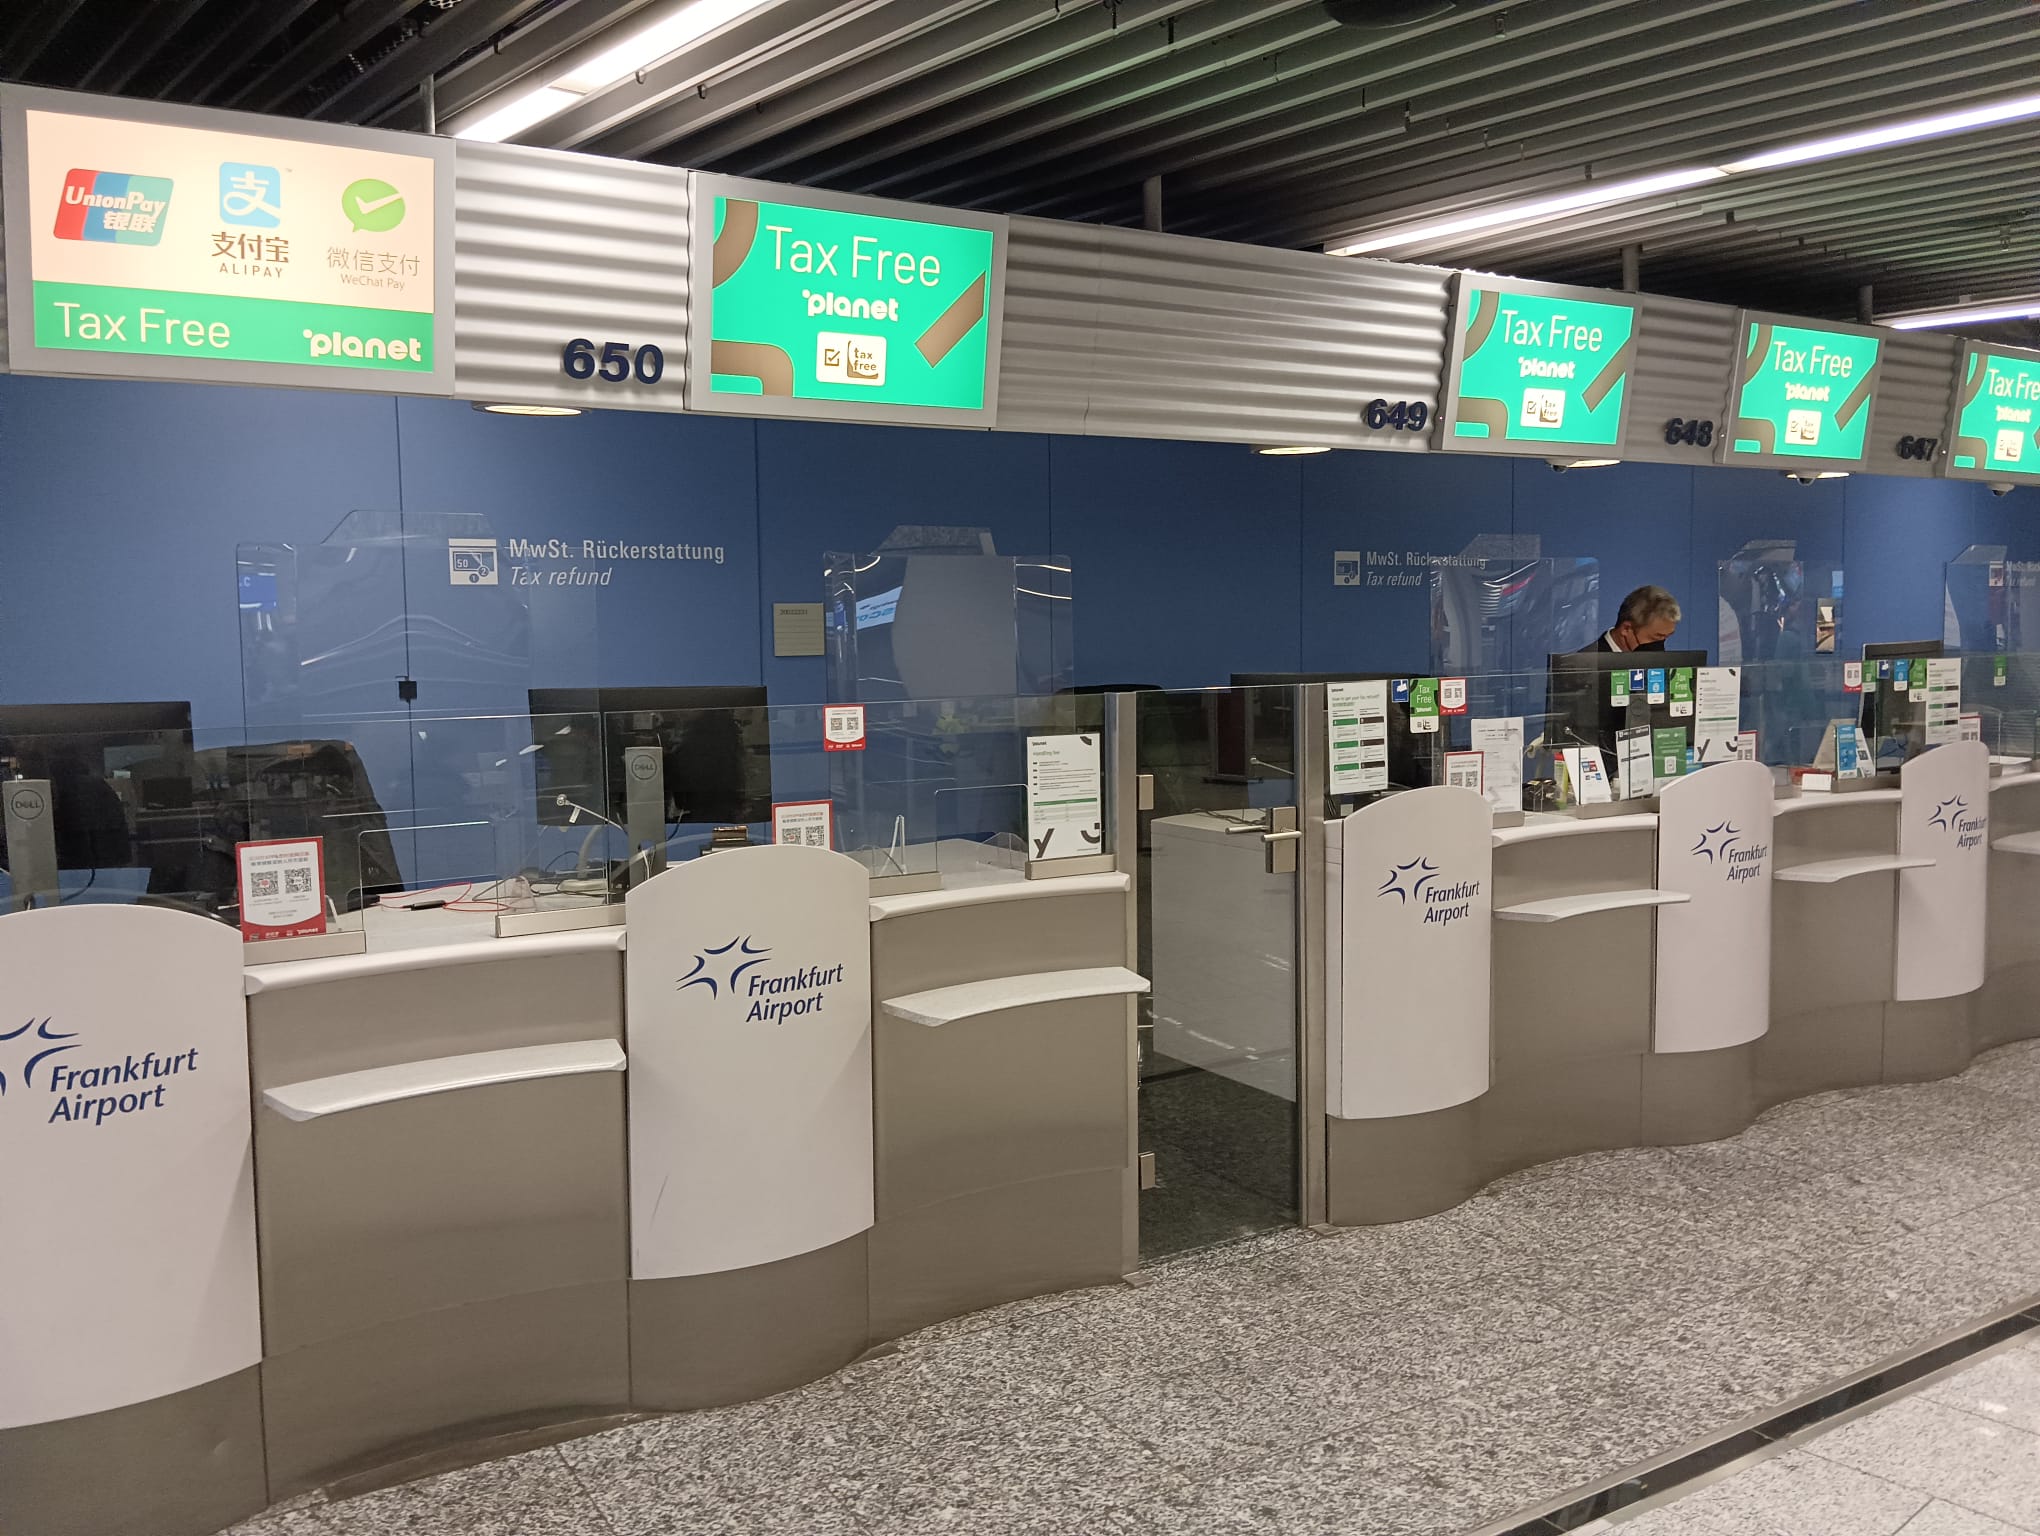 Instant Refund launched at Germany Airport